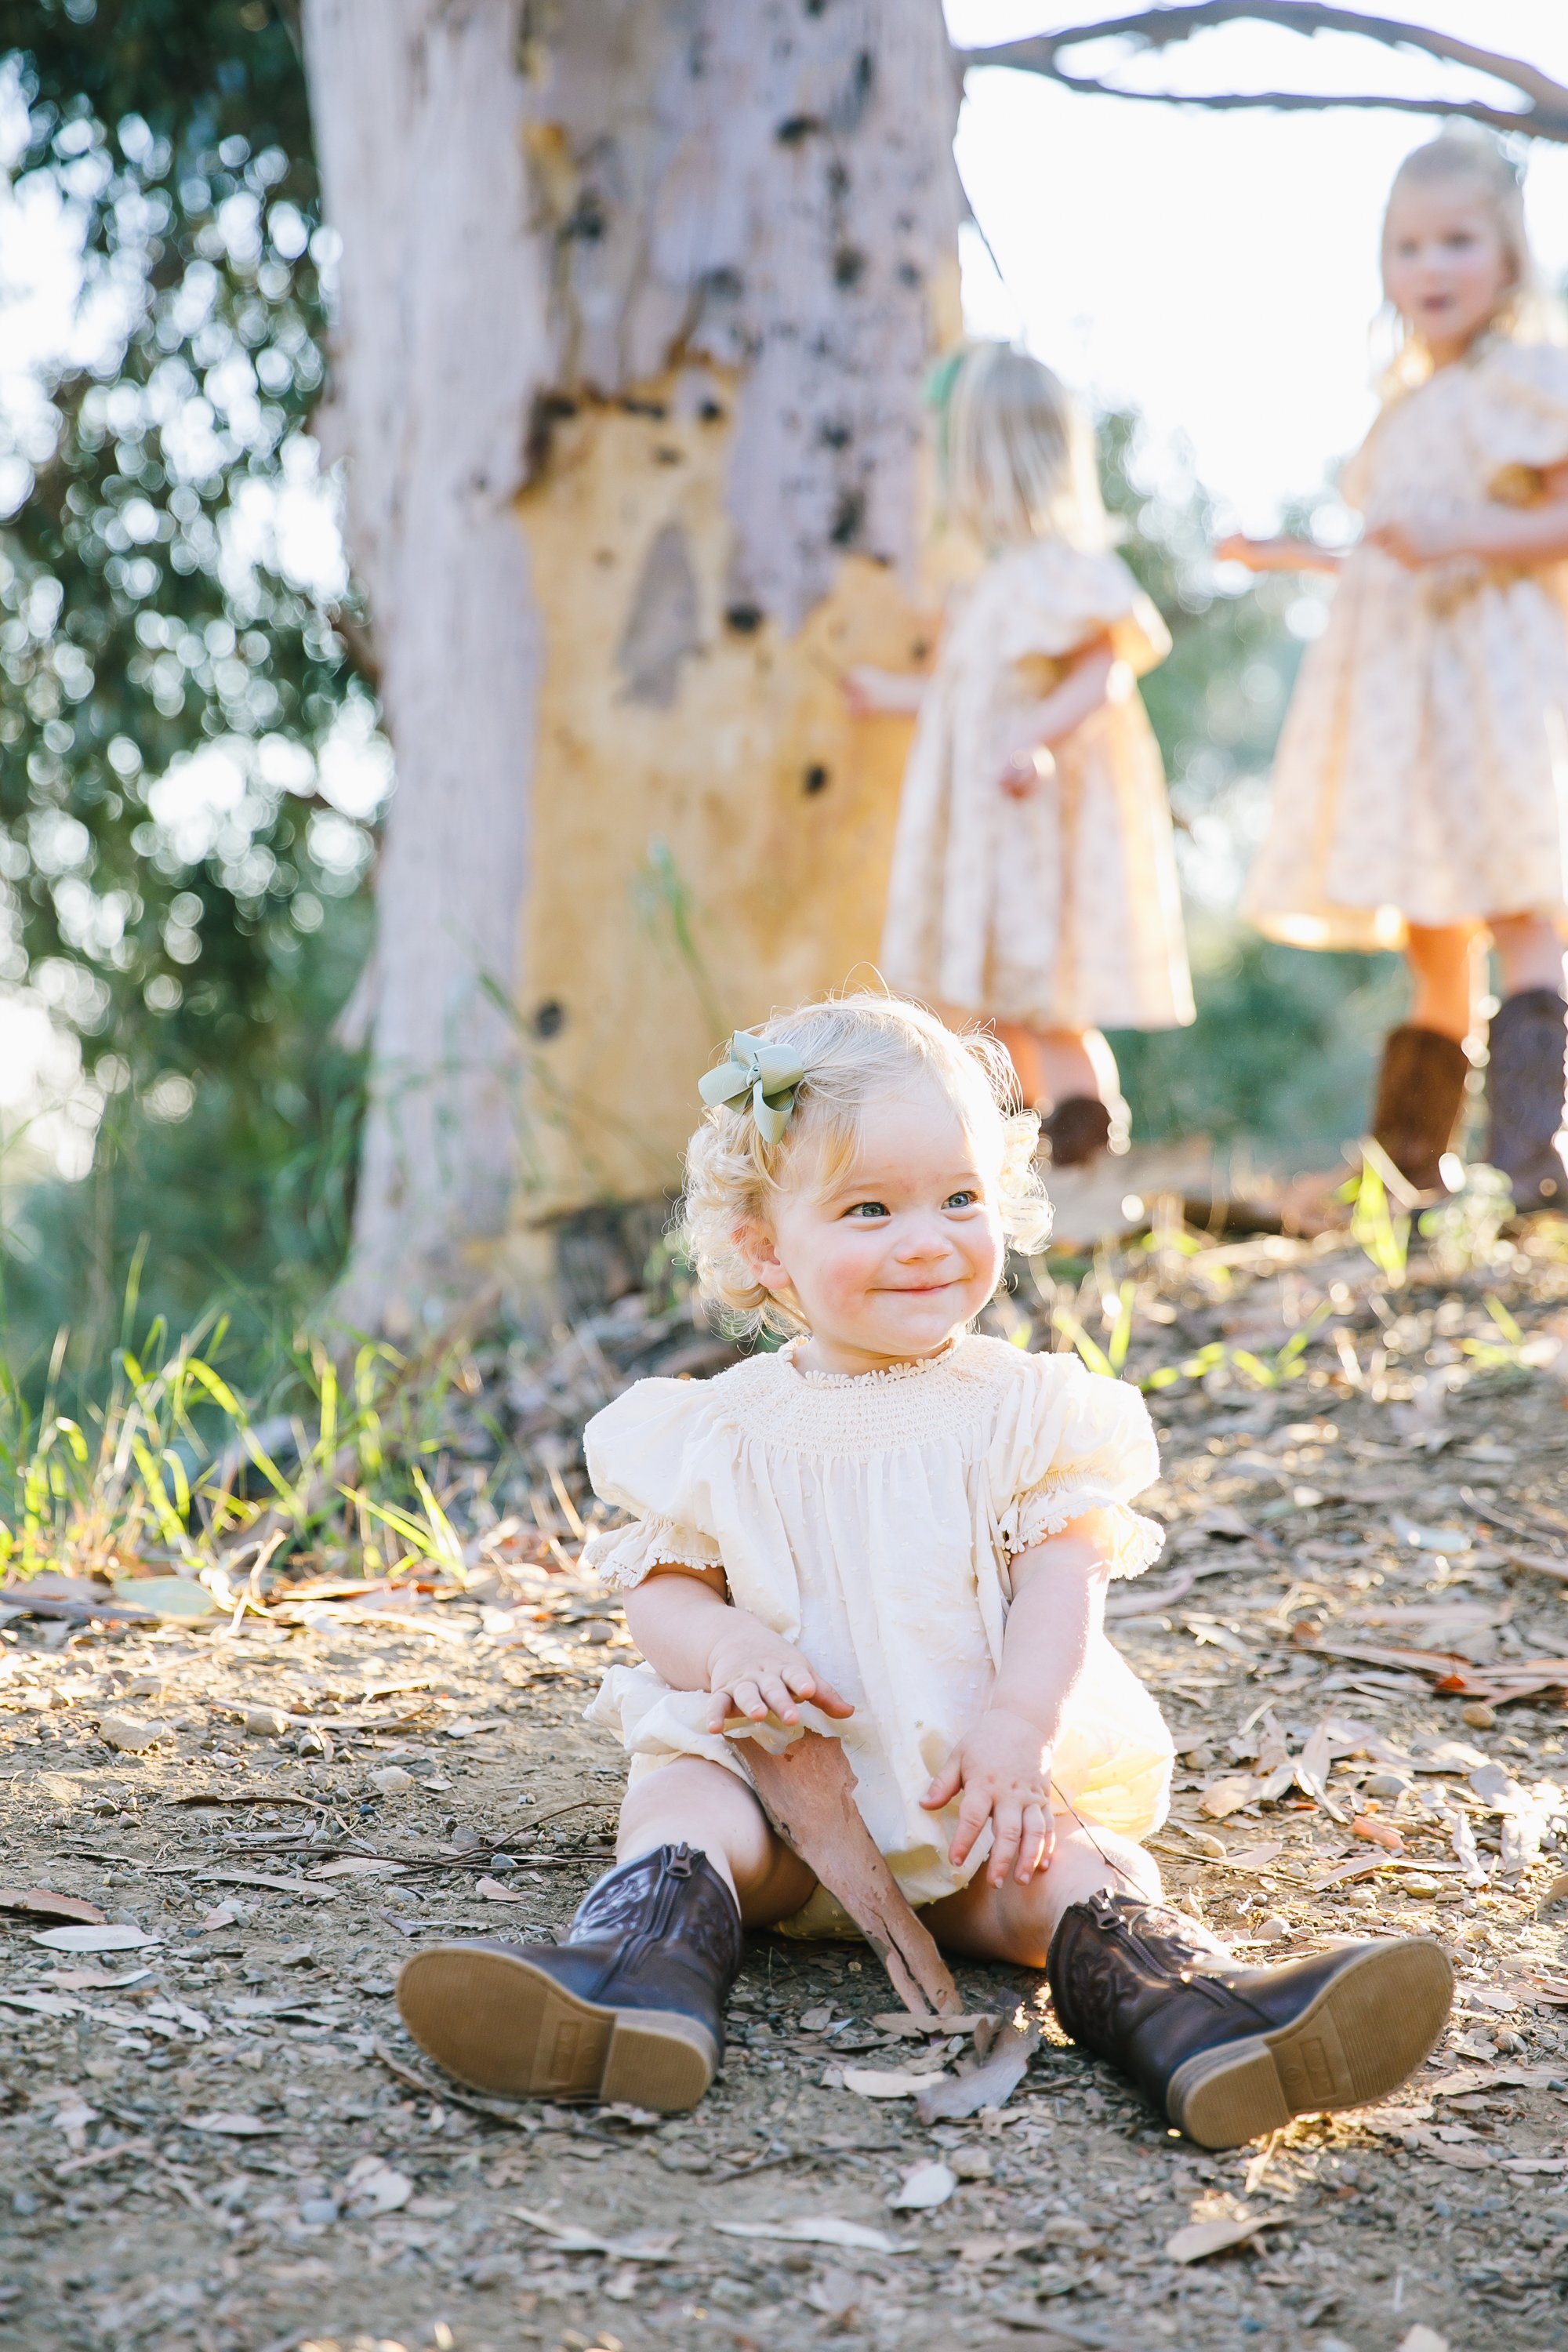 Los_Angeles_Family_Photographer_Golden_Hour_Mini_Session_Fall_Photos_Holiday_Card_Kids_Babies_Children_Luxury_Best_California_Photography-0962.jpg